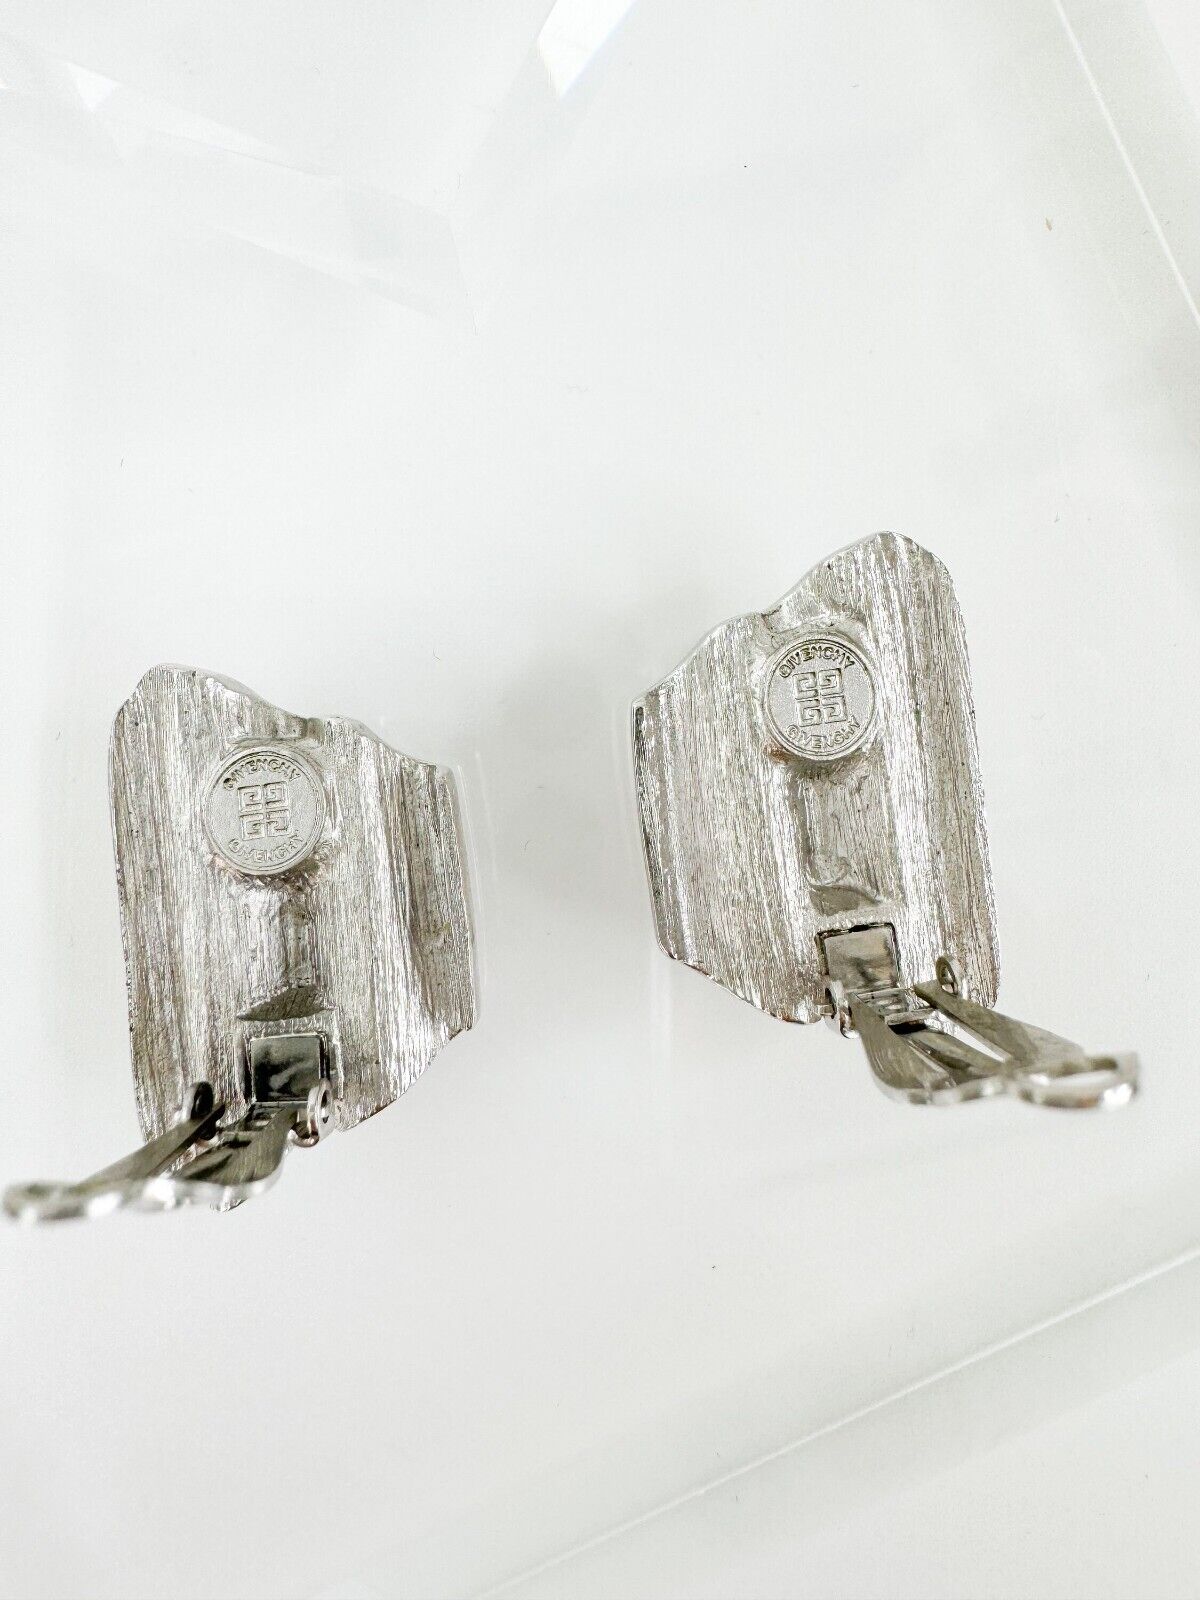 Vintage Givenchy Earrings, Givenchy Silver wave  Earrings, Clip on Earrings, fashion earrings, vintage earrings silver, Vintage Rhinestone